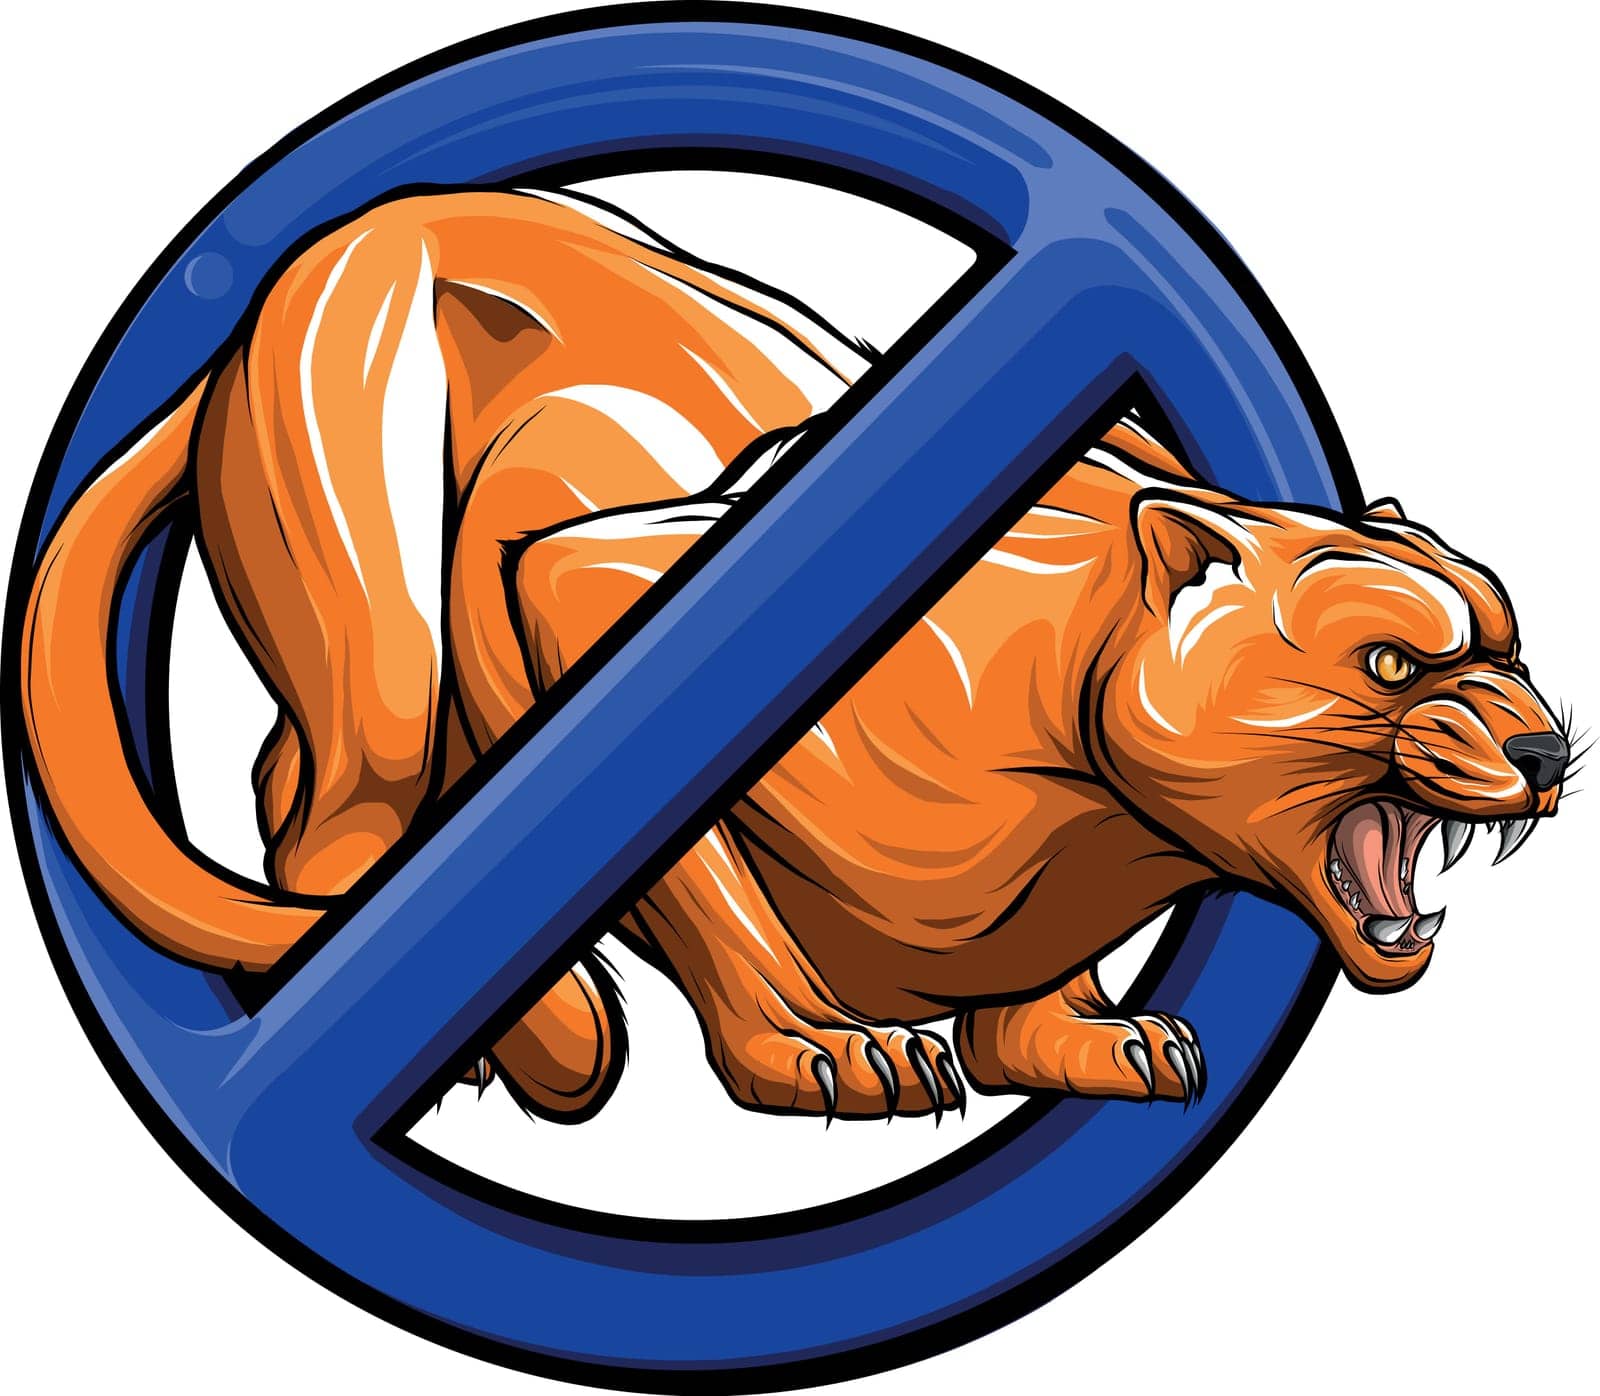 vector illustration of Prohibition sign of panther by dean